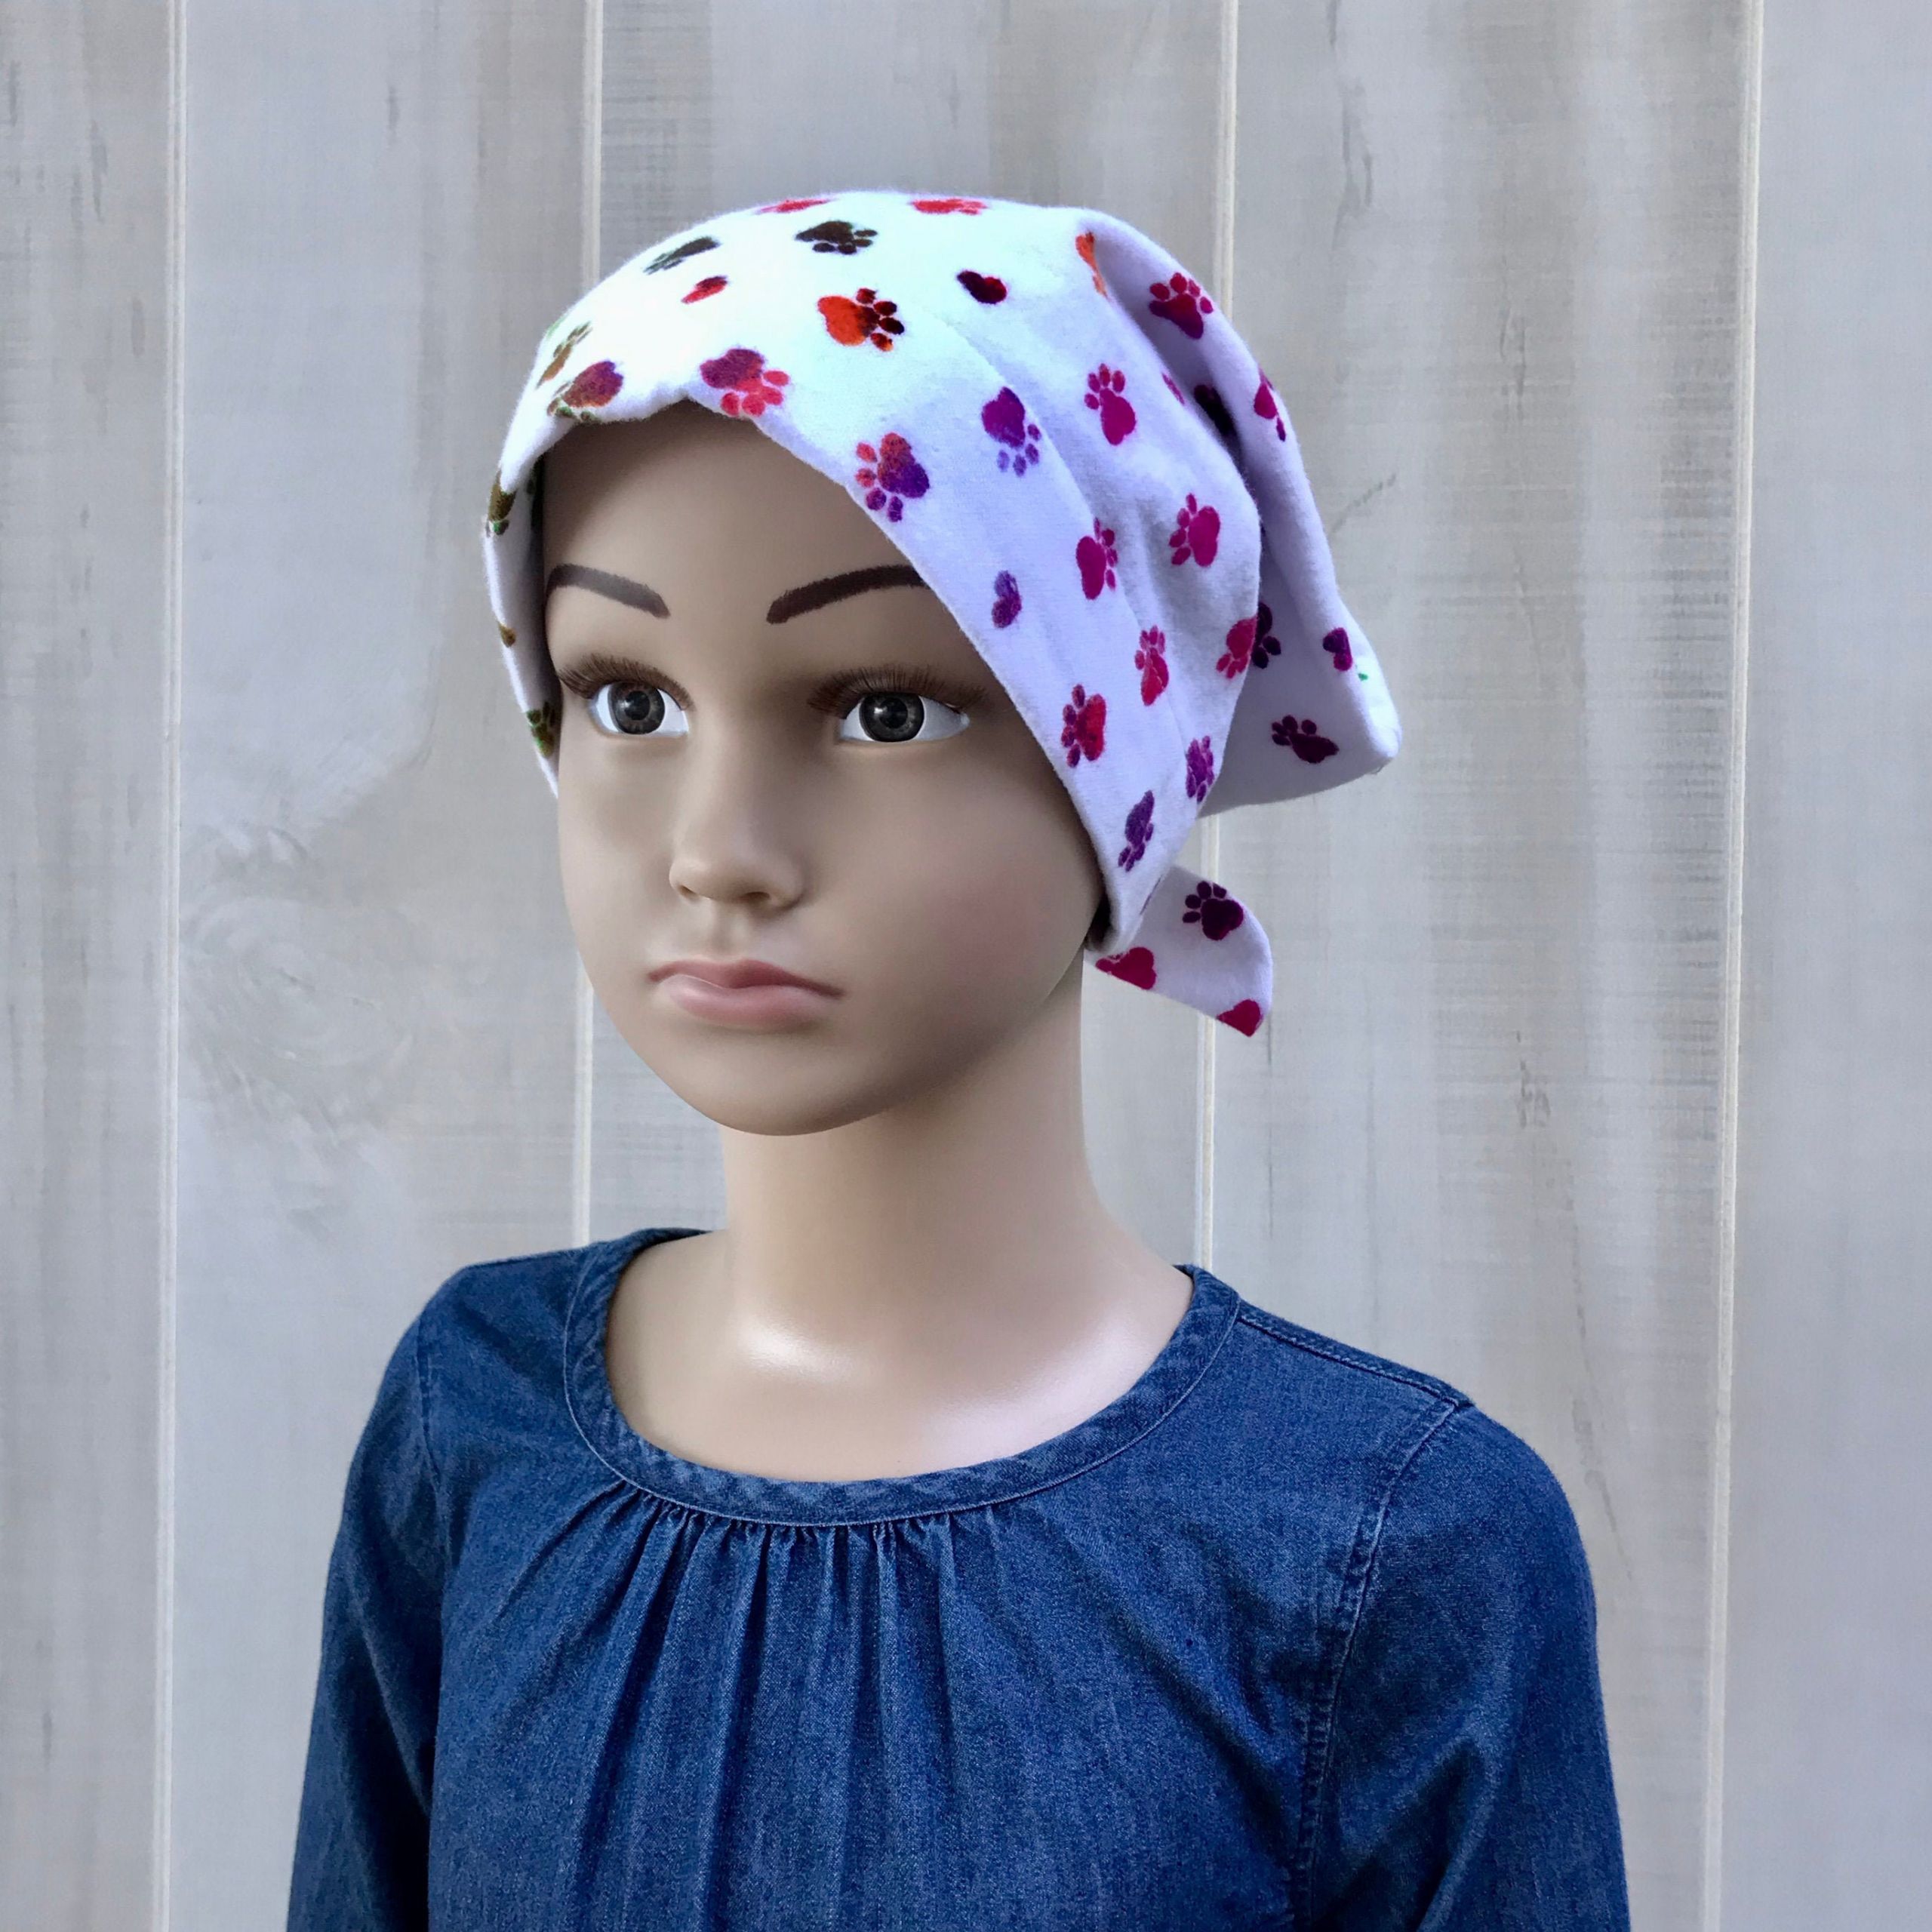 Hair For Kids With Cancer
 Children’s Flannel Head Scarf Girl’s Cancer Headwear